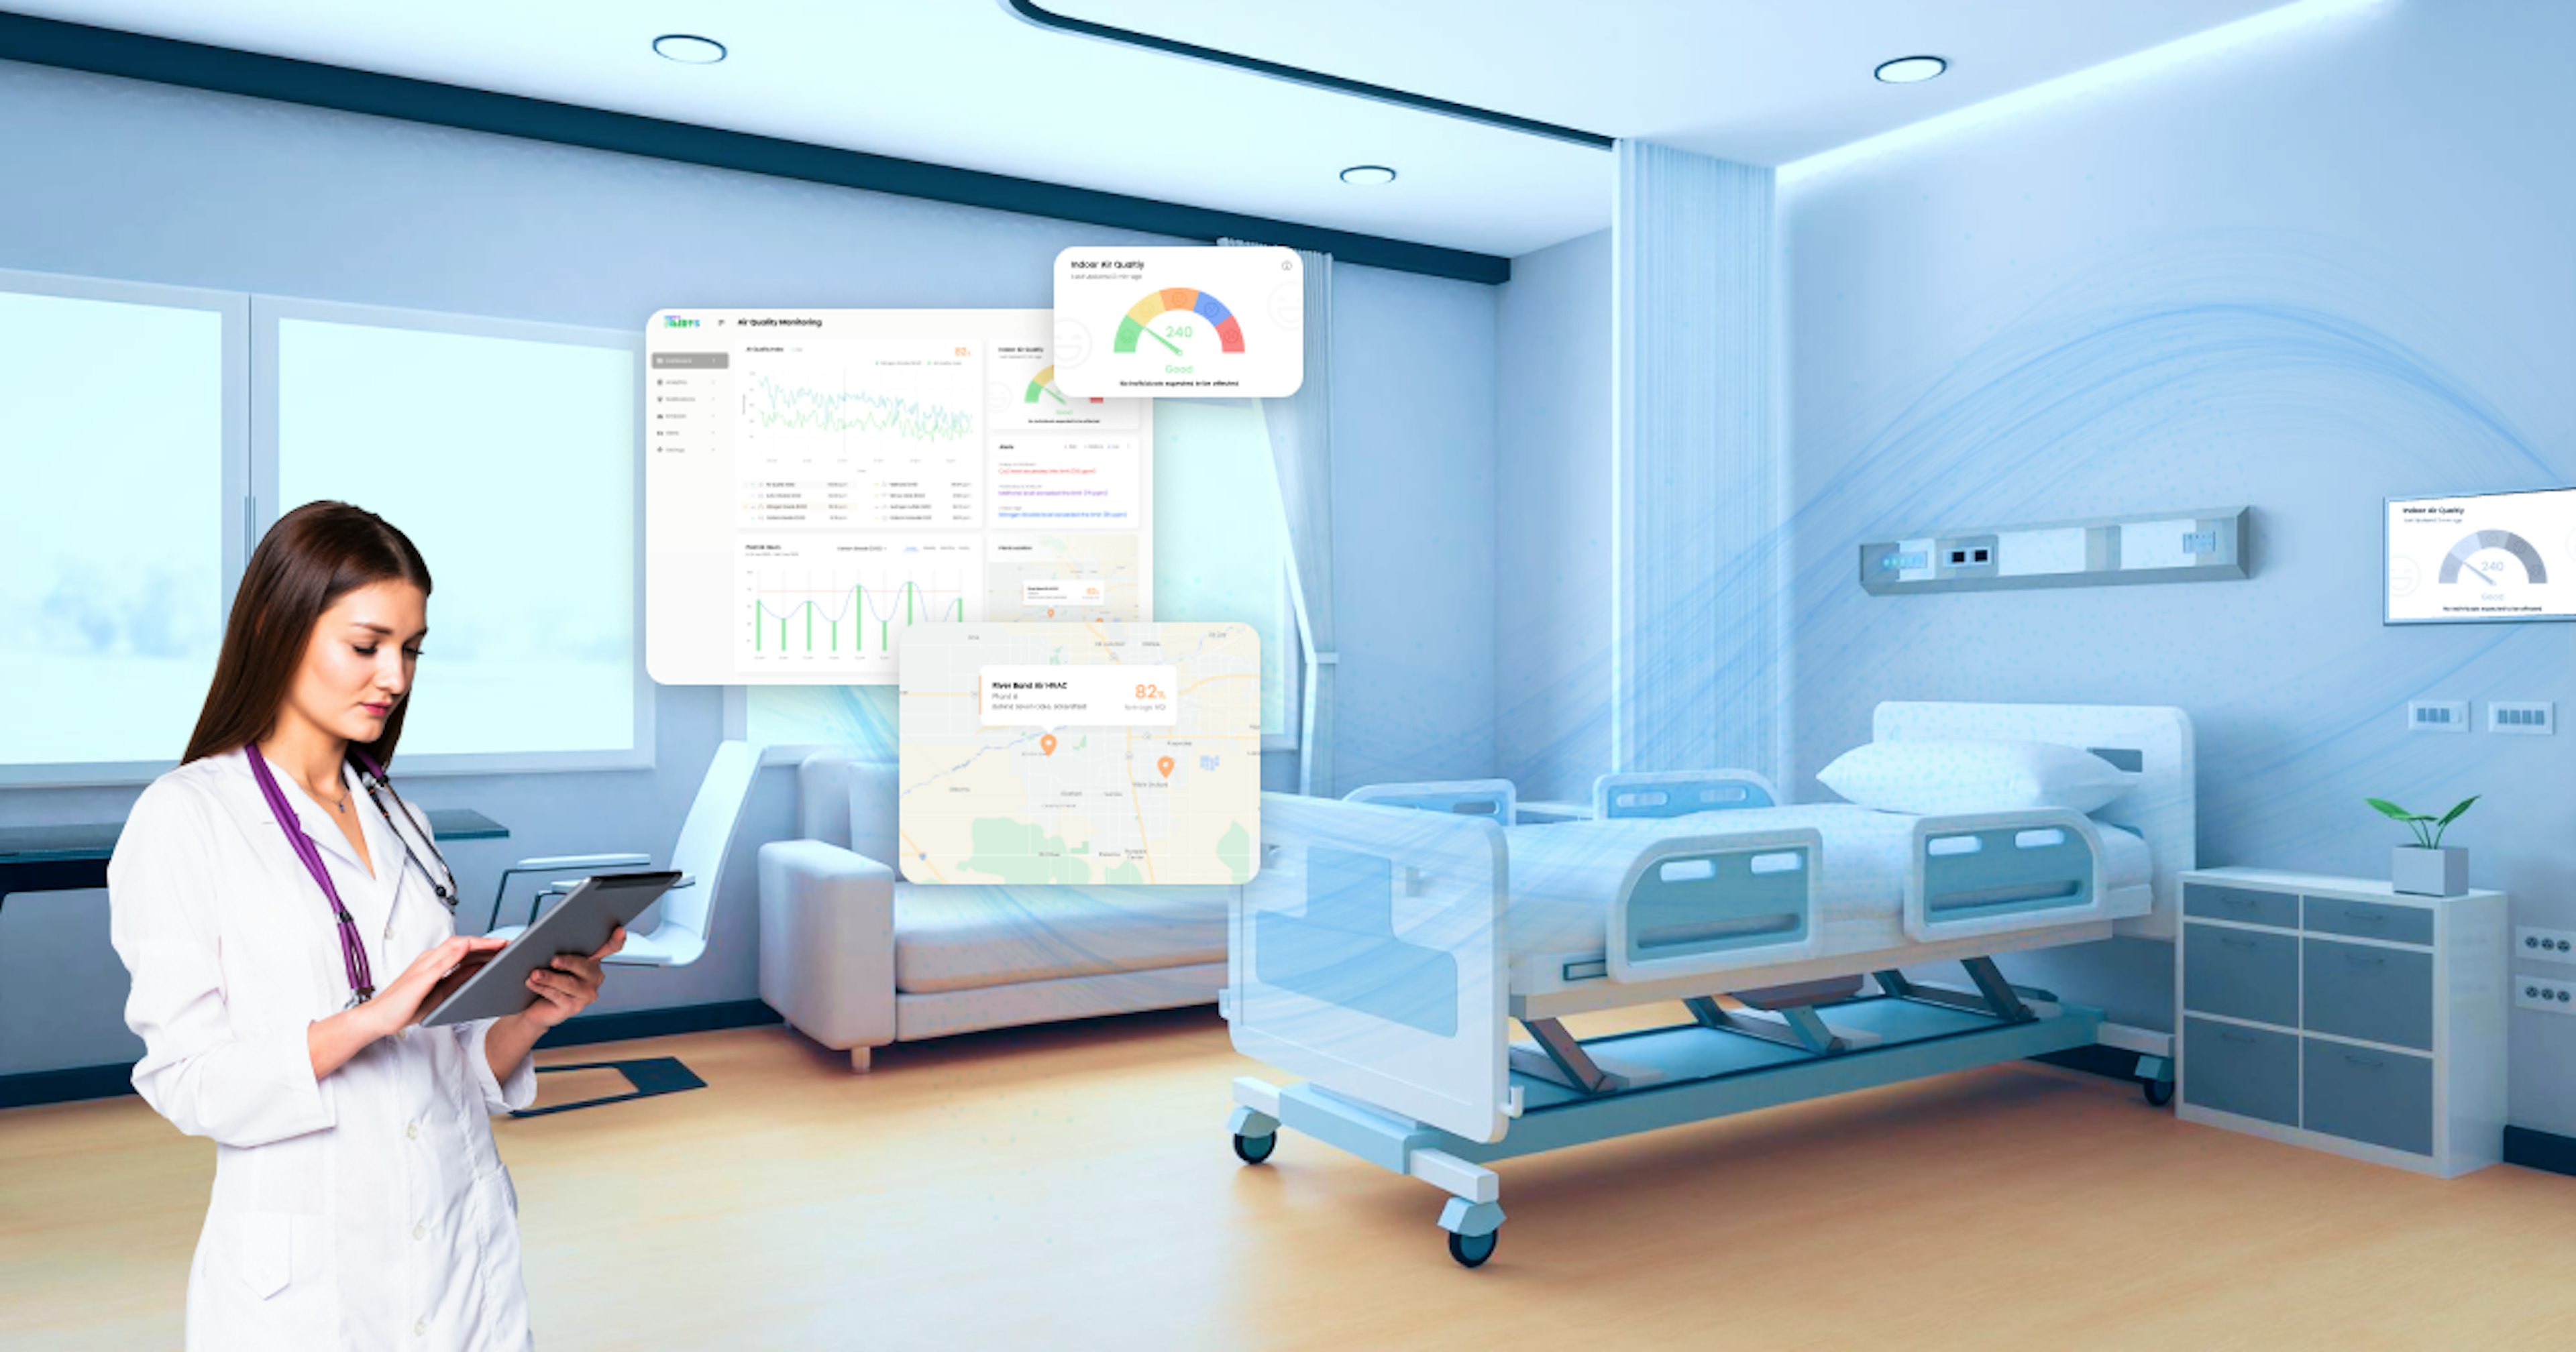 Indoor air quality monitoring in hospitals and laboratories